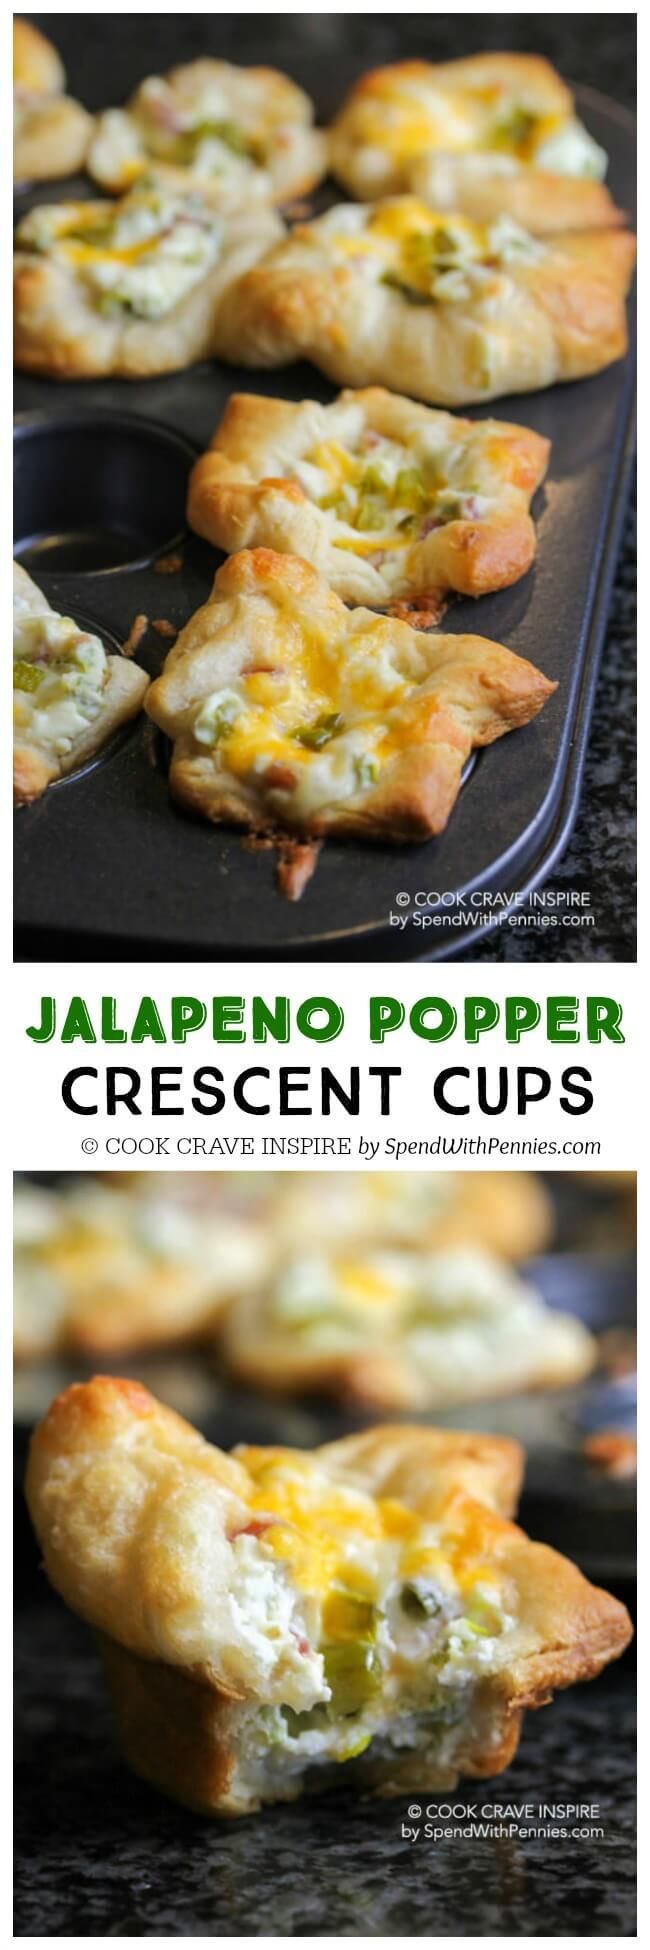 These Jalapeno Popper Crescent cups are the hit of every party and so easy to make! These creamy, cheesy and spicy little two-bite